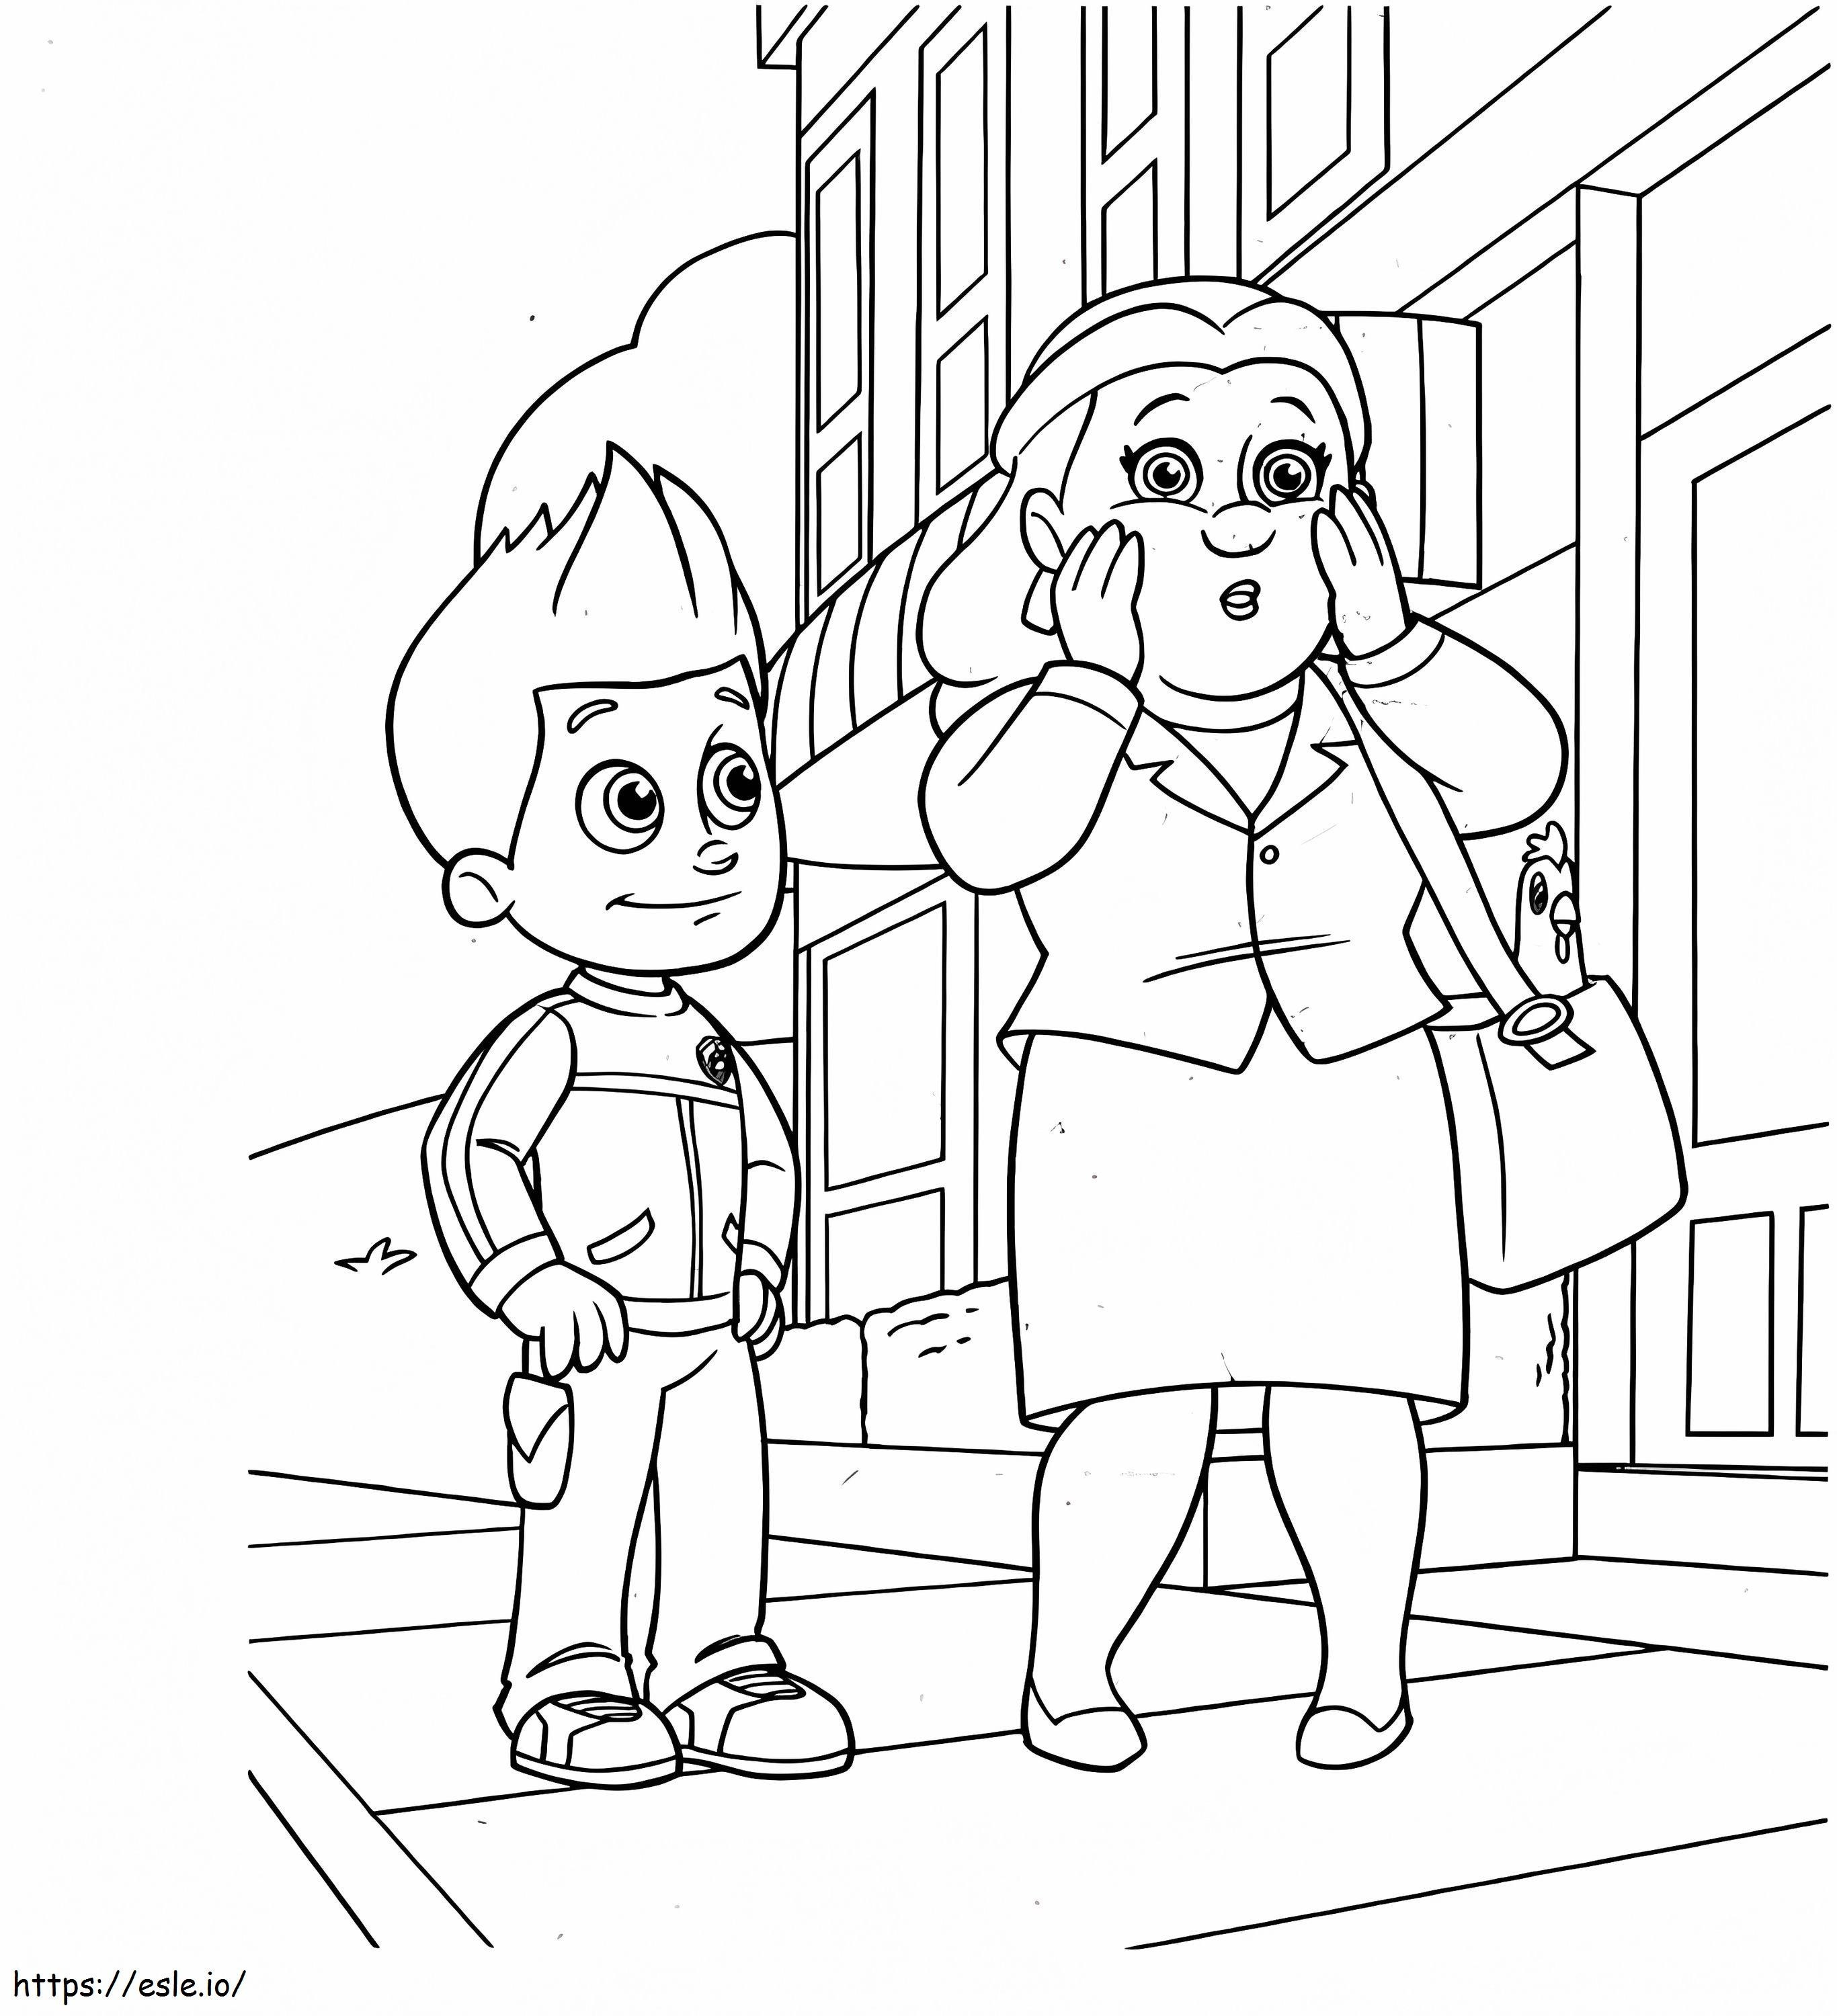 Ryder And Mayor Goodway coloring page